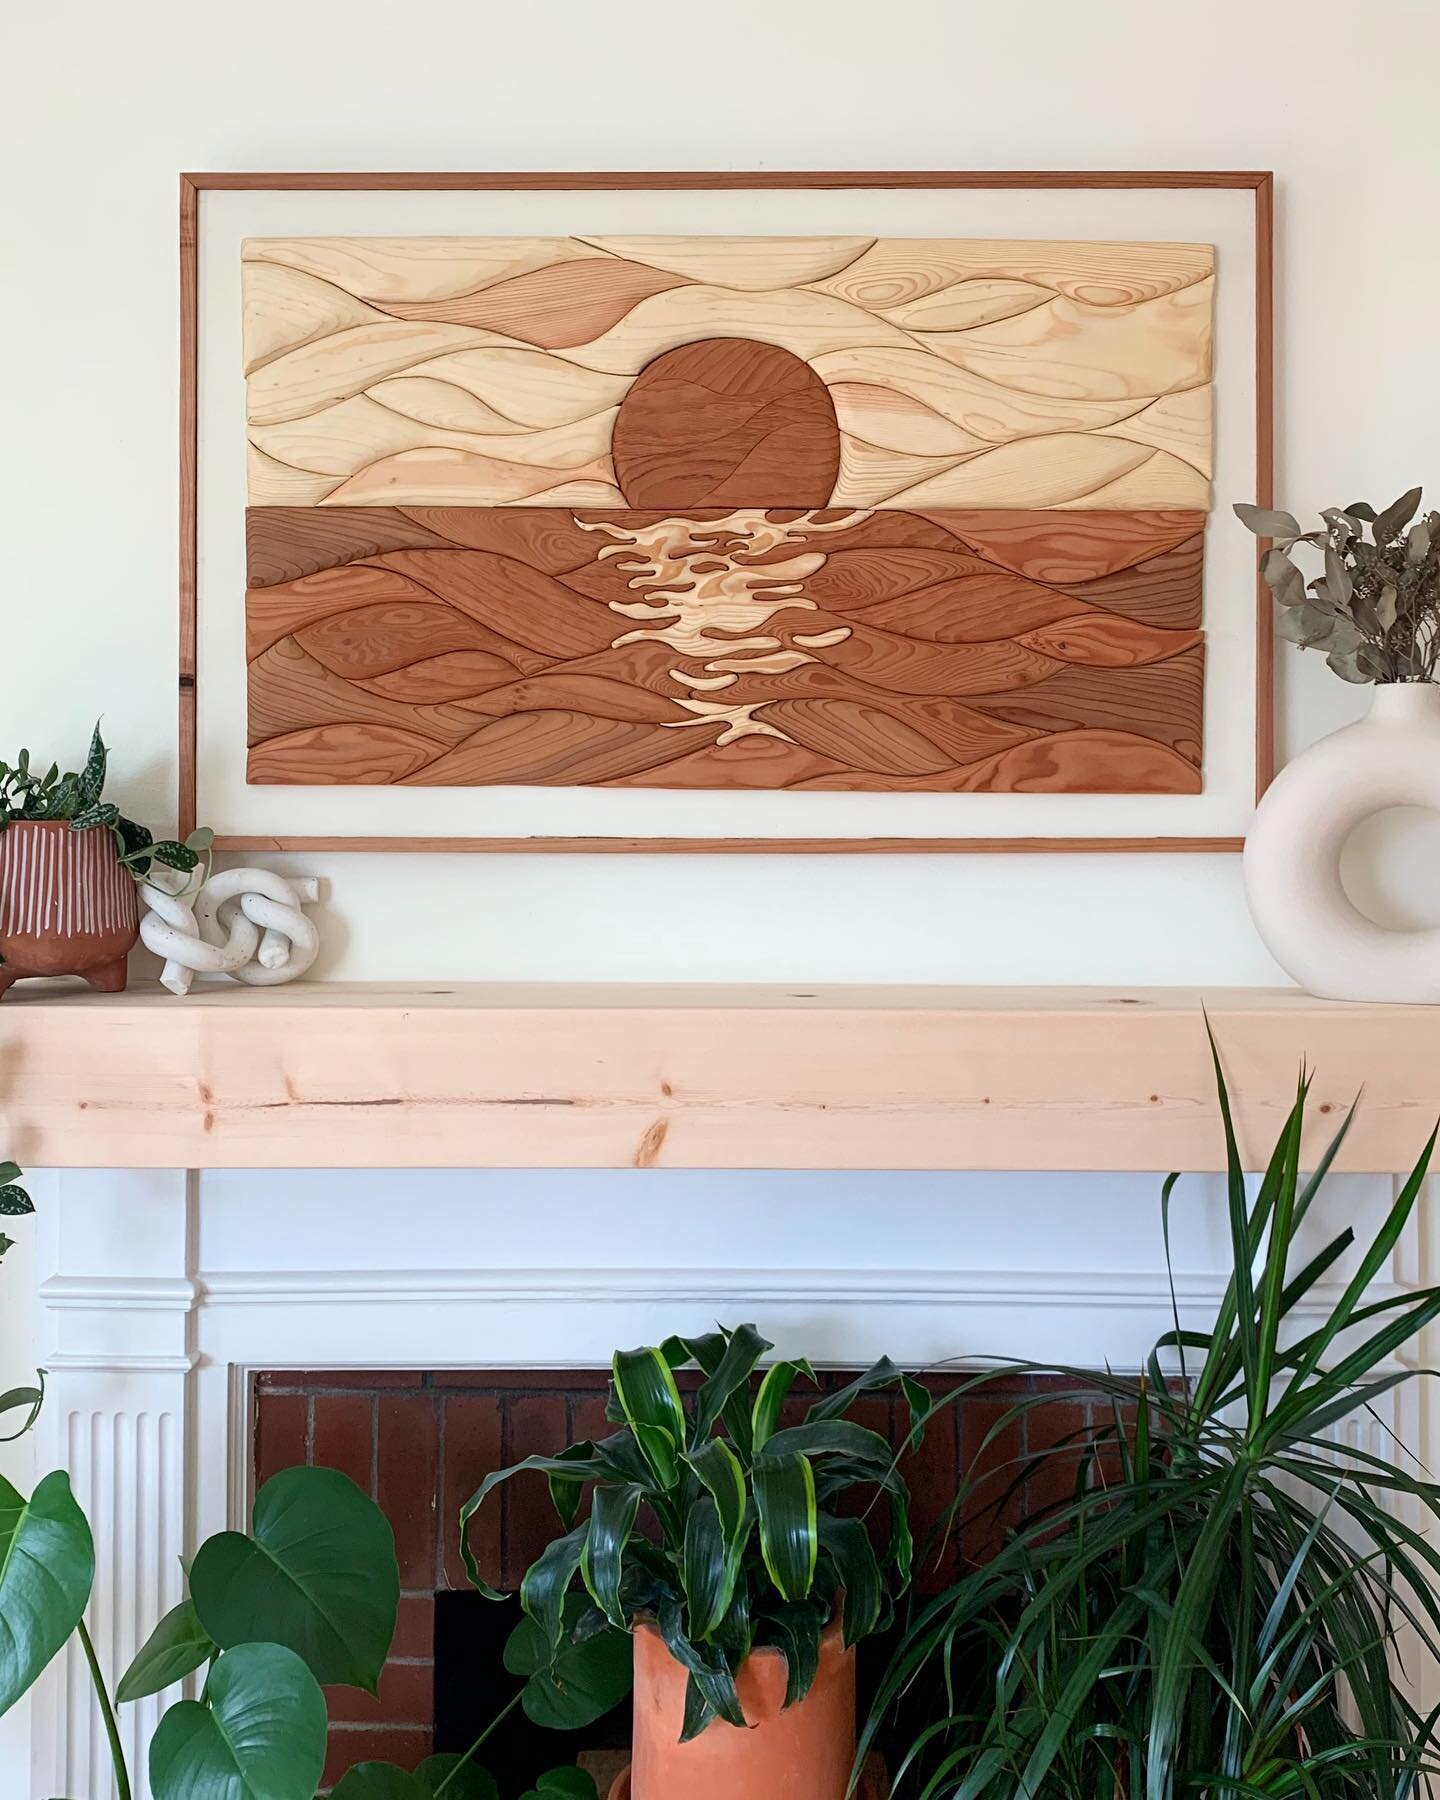 The fog from June gloom has cleared and finally getting some decent snaps of this new Sunset piece☀️ Made with redwood &amp; pine :: all natural wood colors and finishing, no stains or dyes 

DM for custom commissions ✌🏽 

#wood #artisan #maker #cal